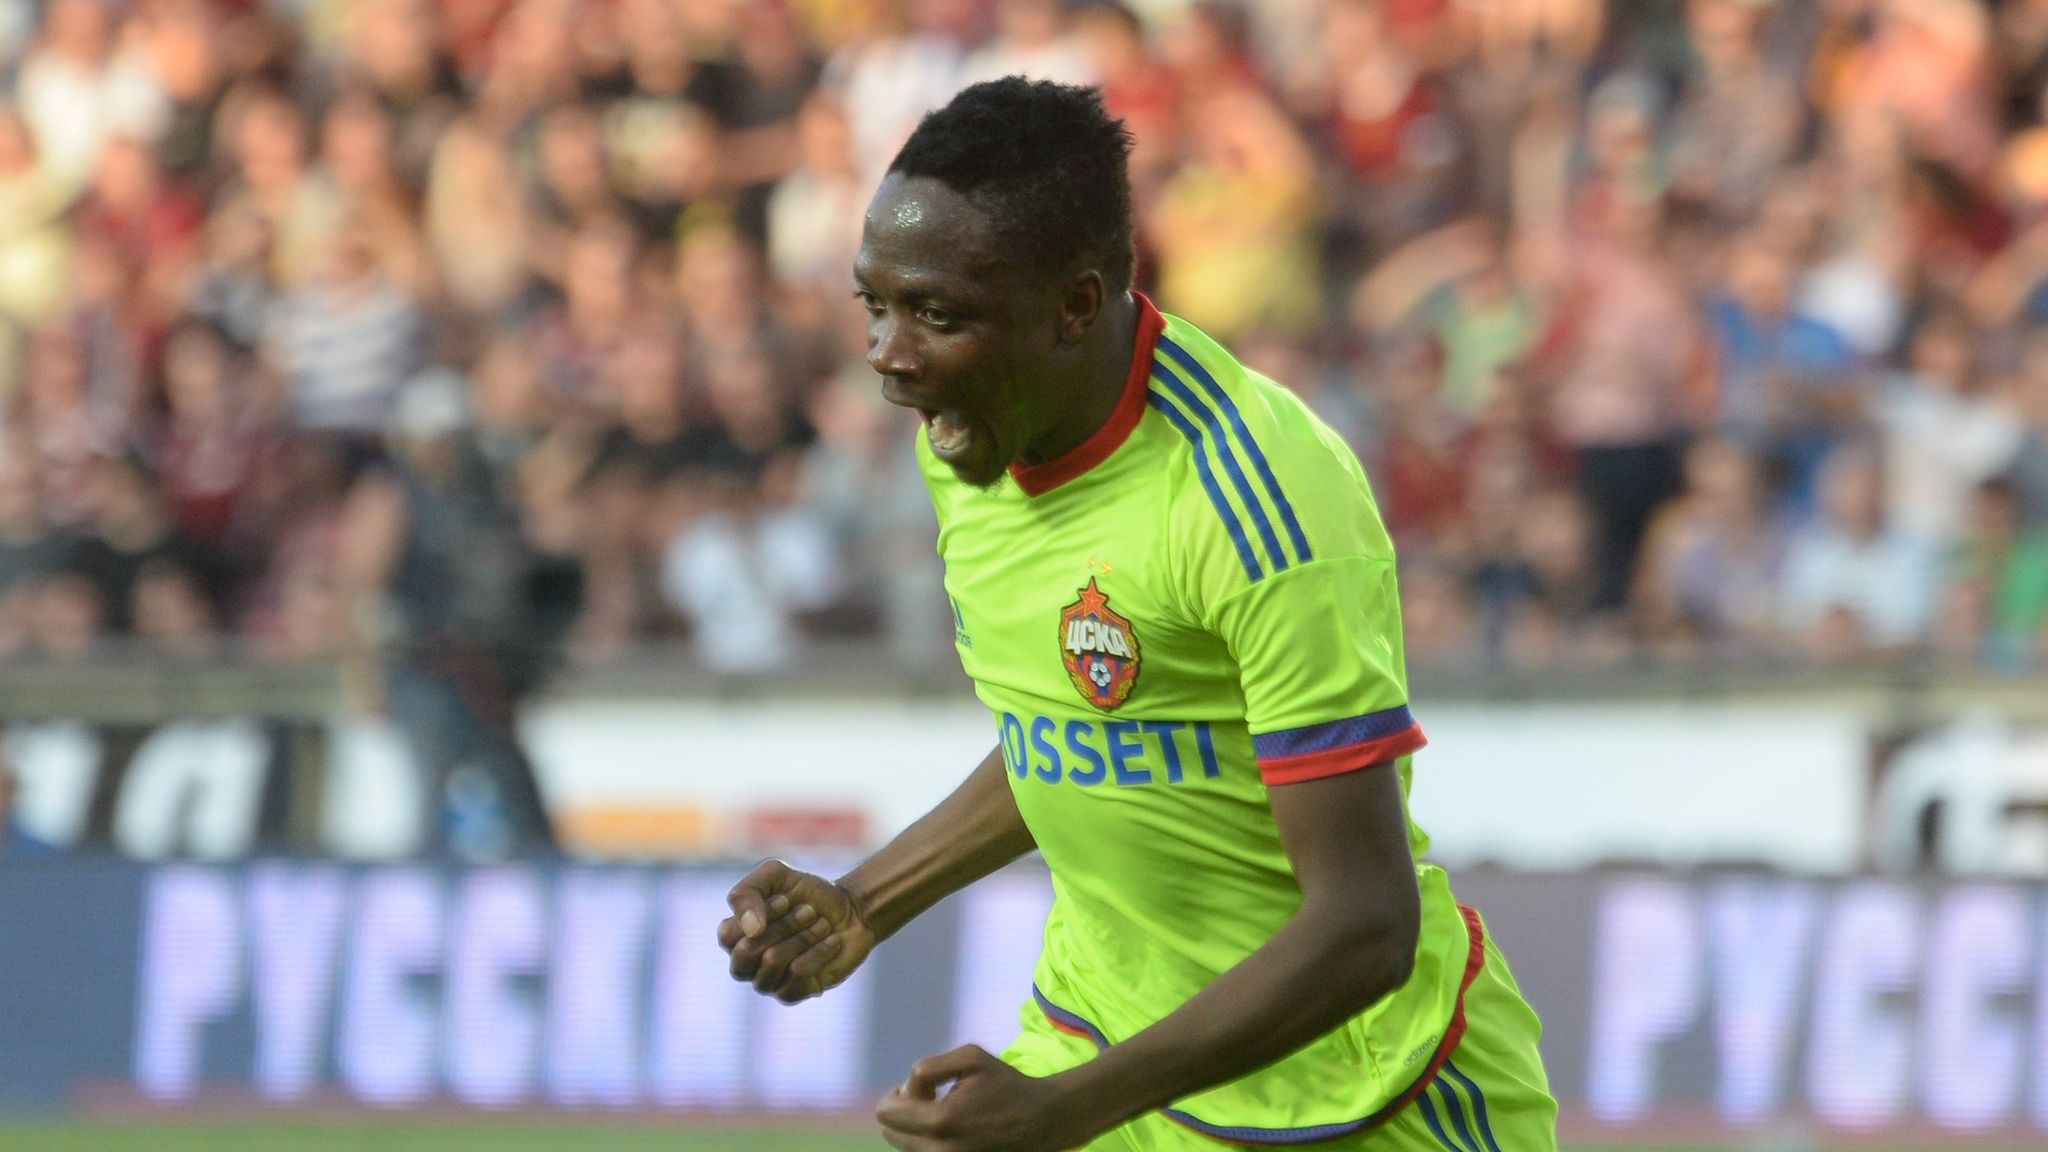 Leicester City sign Ahmed Musa from CSKA Moscow